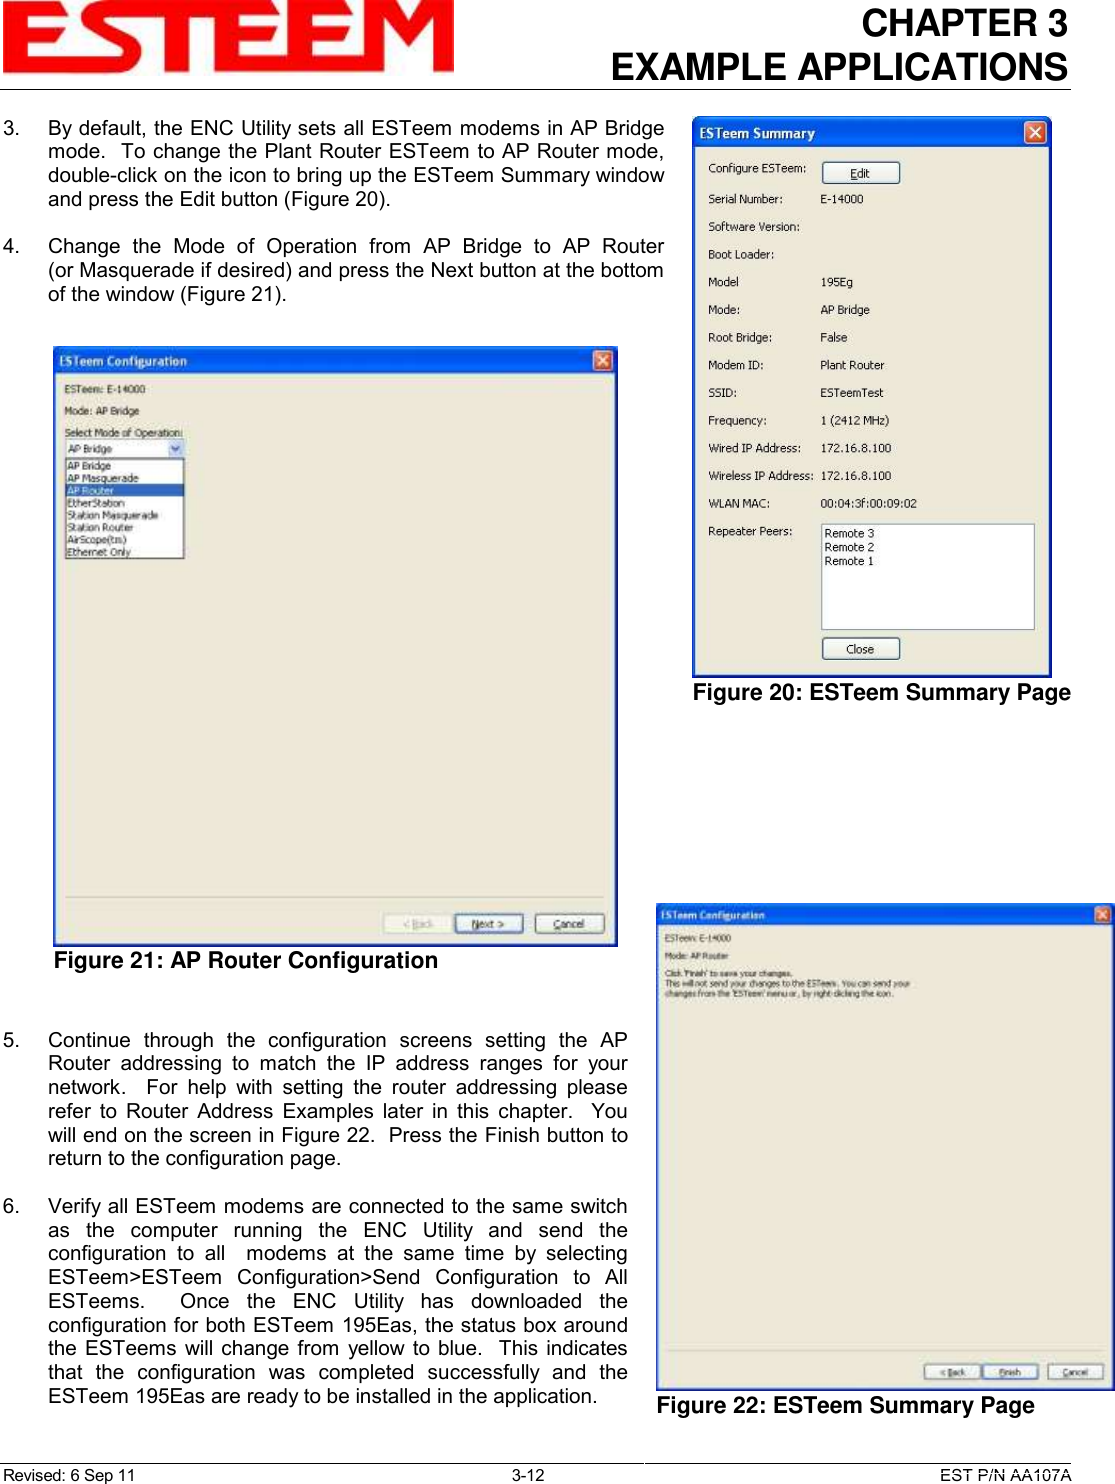 CHAPTER 3 EXAMPLE APPLICATIONS  Revised: 6 Sep 11  3-12  EST P/N AA107A 3.    By default, the ENC Utility sets all ESTeem modems in AP Bridge mode.  To change the Plant Router ESTeem to AP Router mode, double-click on the icon to bring up the ESTeem Summary window and press the Edit button (Figure 20).  4.    Change  the  Mode  of  Operation  from  AP  Bridge  to  AP  Router (or Masquerade if desired) and press the Next button at the bottom of the window (Figure 21).        5.    Continue  through  the  configuration  screens  setting  the  AP Router  addressing  to  match  the  IP  address  ranges  for  your network.    For  help  with  setting  the  router  addressing  please refer  to  Router  Address  Examples  later  in  this  chapter.    You will end on the screen in Figure 22.  Press the Finish button to return to the configuration page.  6.    Verify all ESTeem modems are connected to the same switch as  the  computer  running  the  ENC  Utility  and  send  the configuration  to  all    modems  at  the  same  time  by  selecting ESTeem&gt;ESTeem  Configuration&gt;Send  Configuration  to  All ESTeems.    Once  the  ENC  Utility  has  downloaded  the configuration for both ESTeem 195Eas, the status box around the ESTeems  will change  from  yellow to blue.  This indicates that  the  configuration  was  completed  successfully  and  the ESTeem 195Eas are ready to be installed in the application.  Figure 21: AP Router Configuration   Figure 20: ESTeem Summary Page    Figure 22: ESTeem Summary Page   